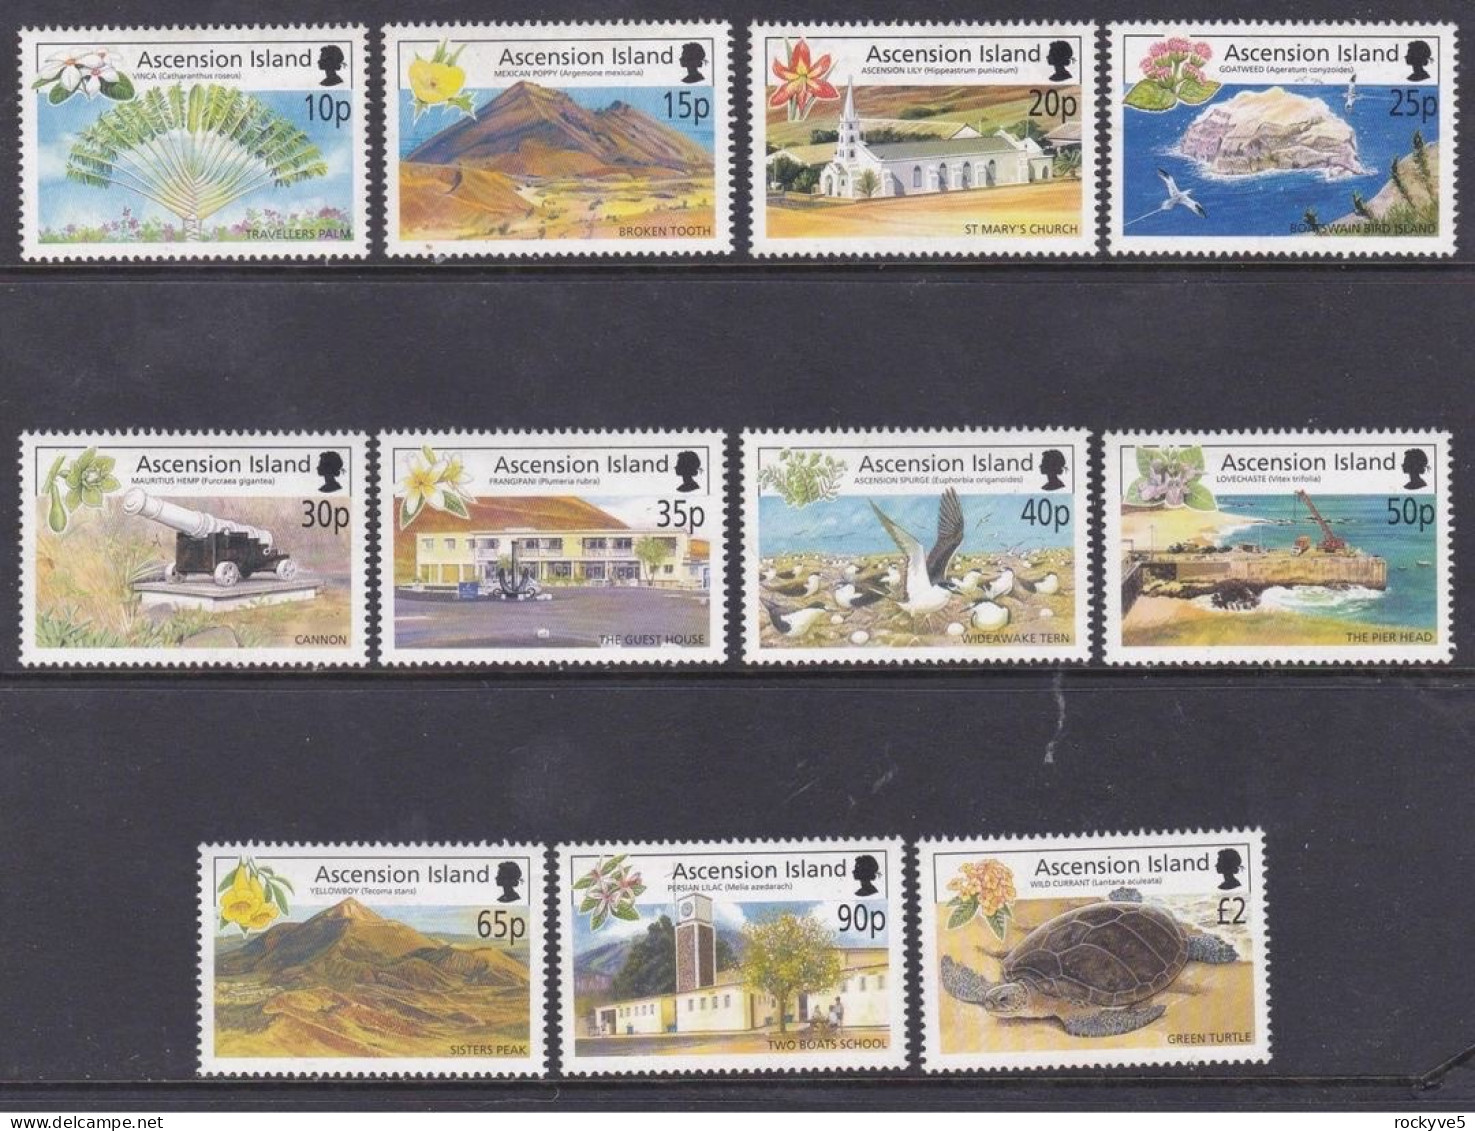 Ascension Island 2002 Island Views Definitives To £2 MNH CV £28 SP £9.99 - Ascension